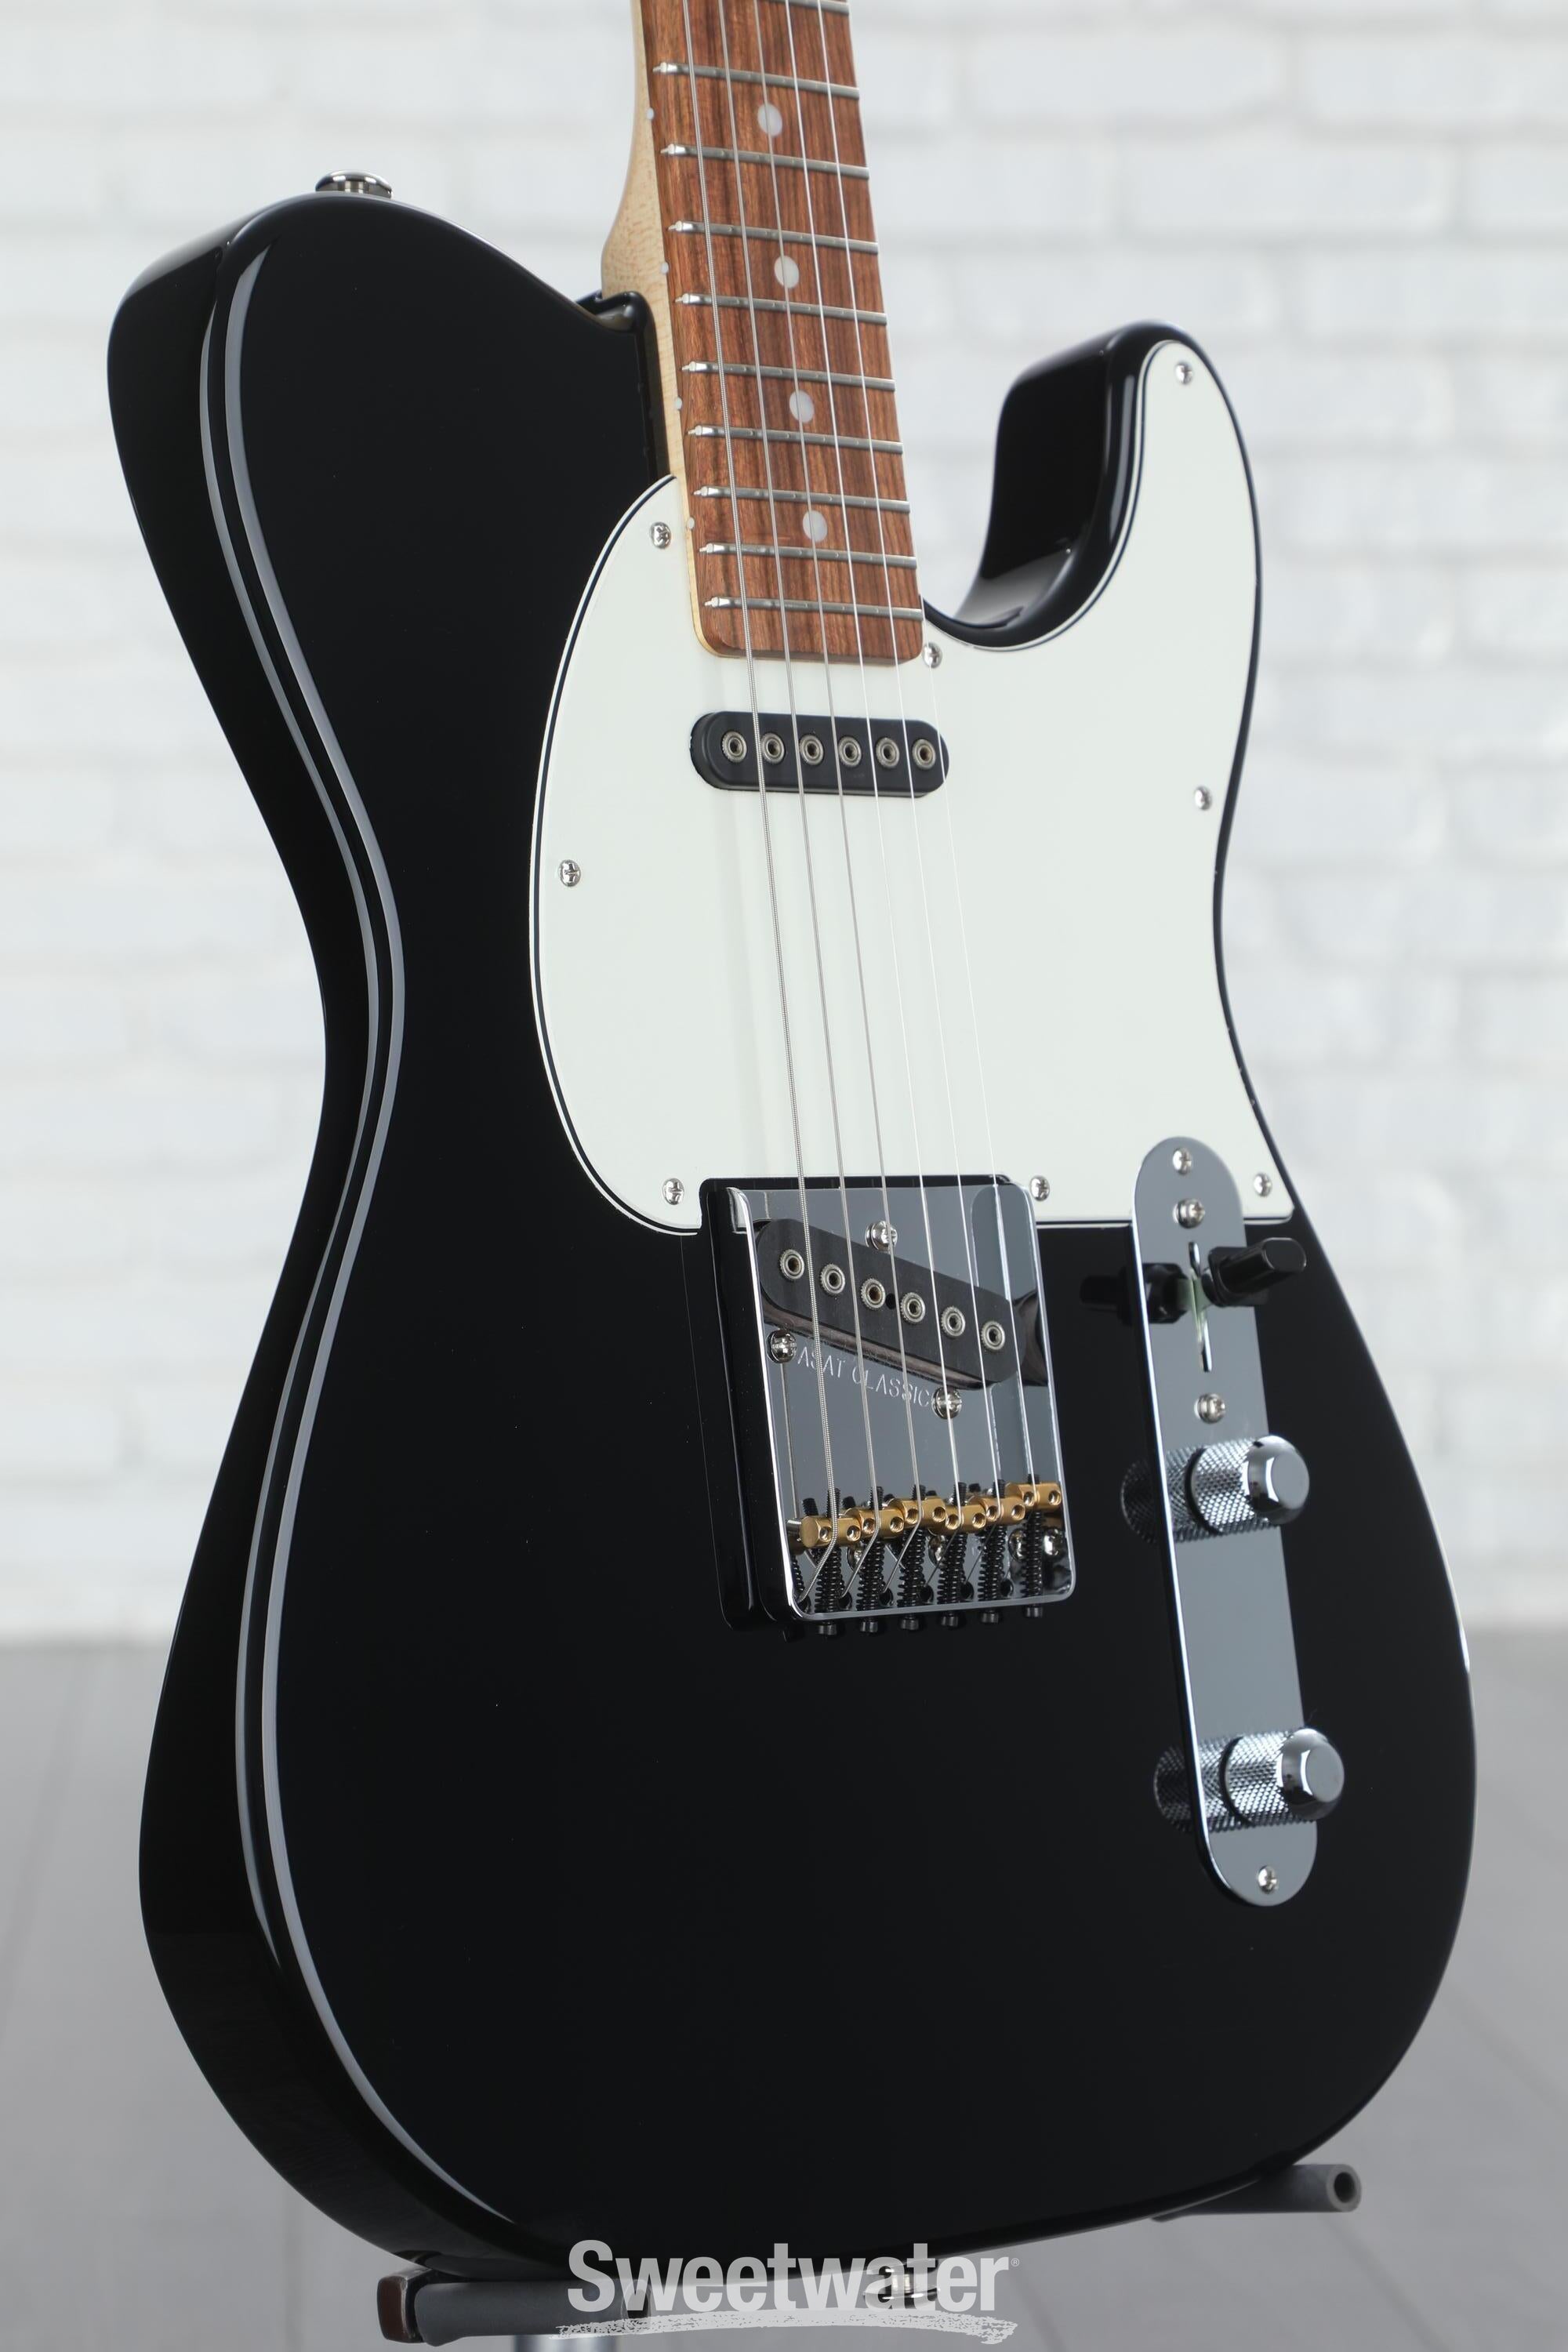 G&L Fullerton Deluxe ASAT Classic Electric Guitar - Jet Black with 